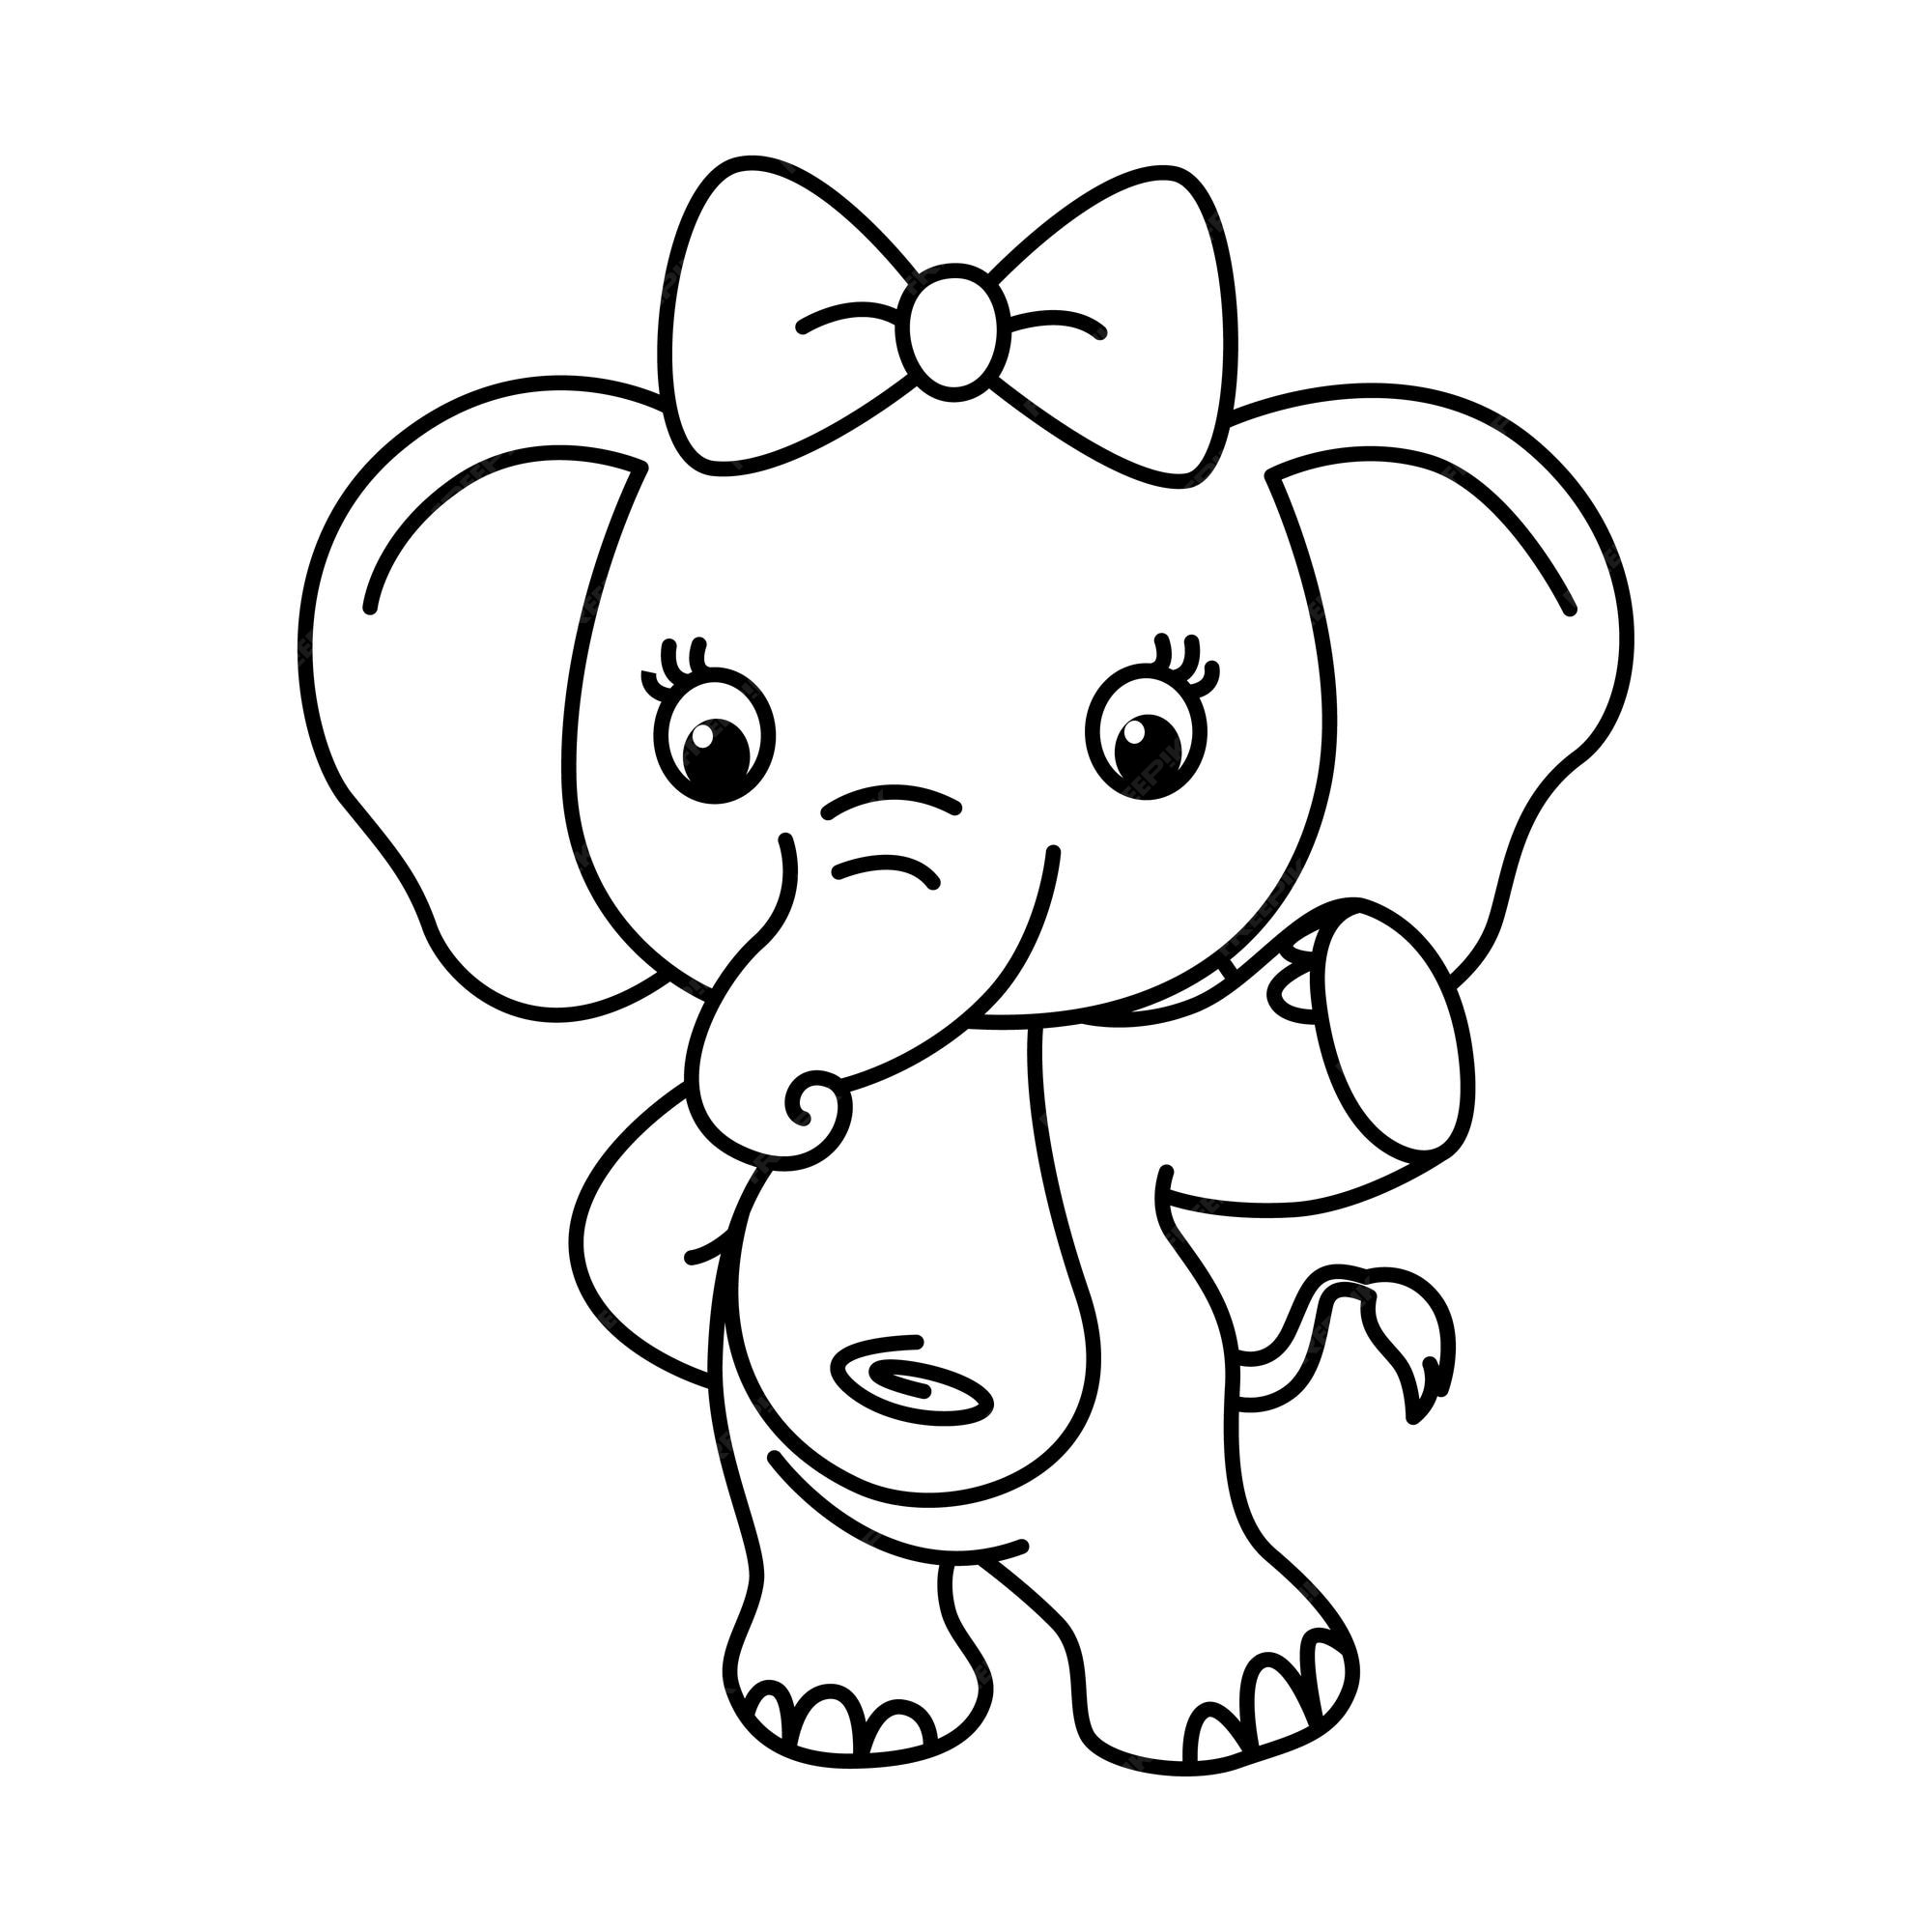 Premium Vector | Cute elephant cartoon characters vector illustration for  kids coloring book